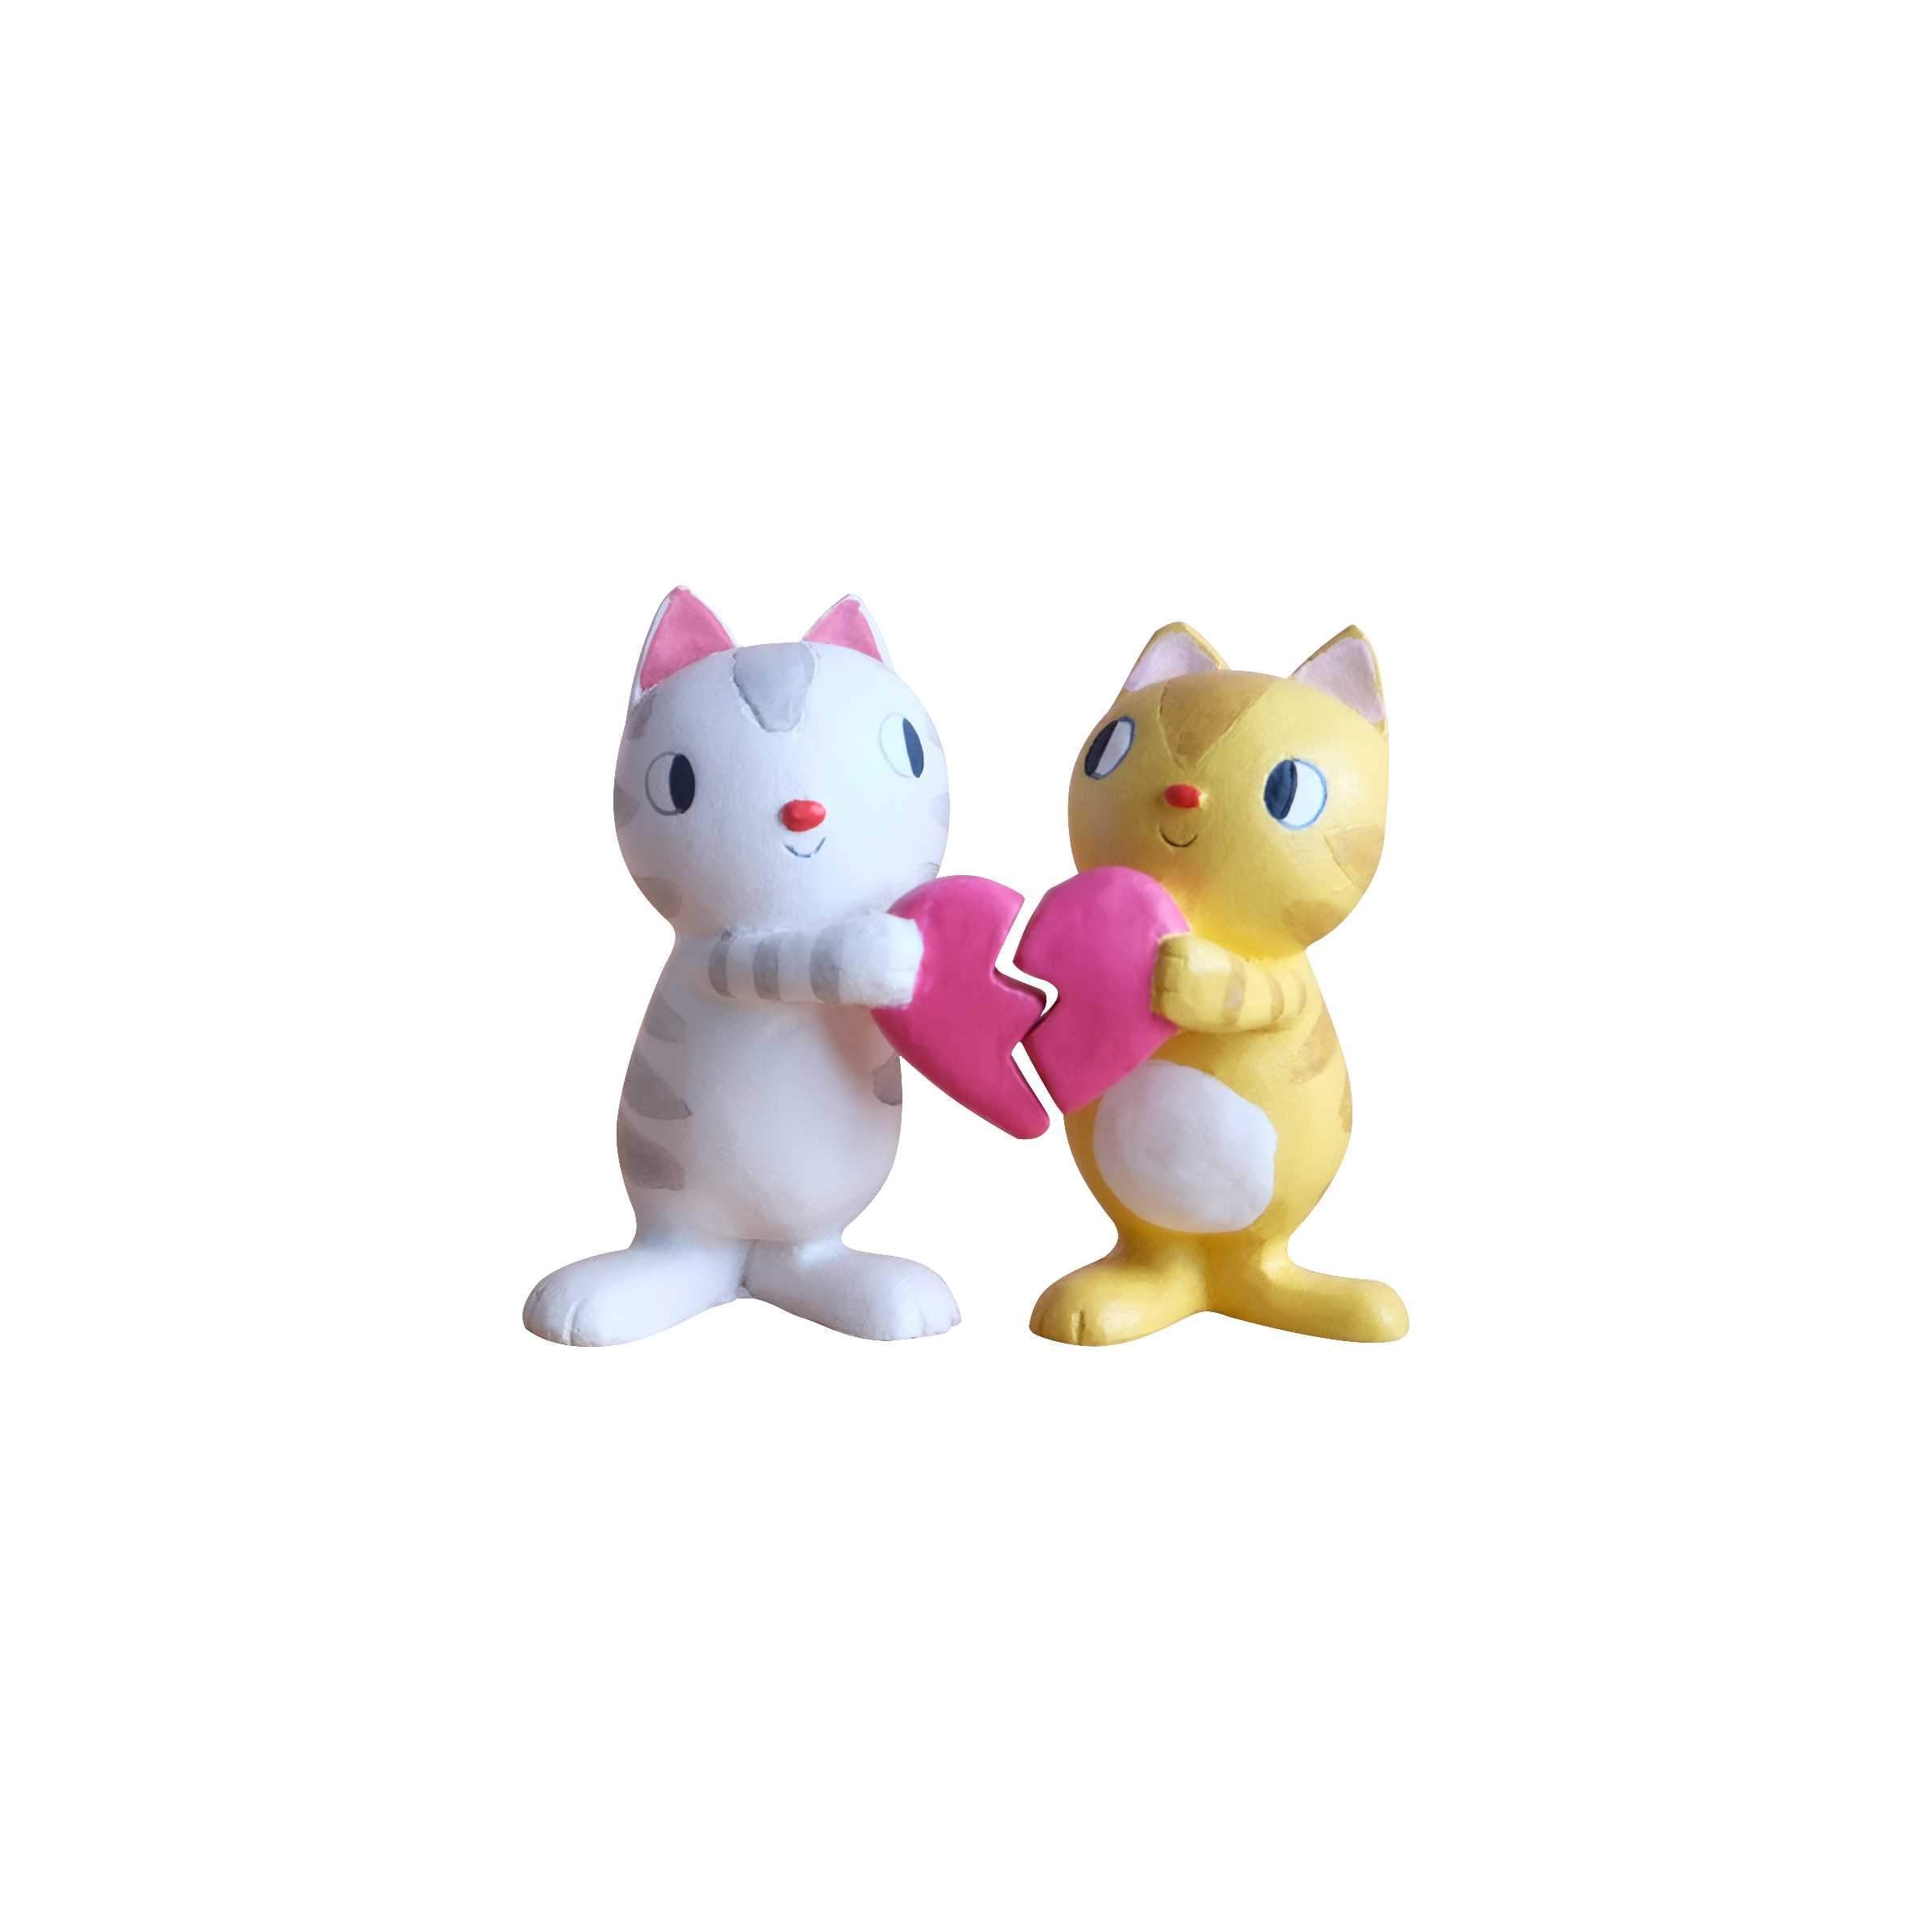 Felicity Kitty Couple Heart: Yellow and White